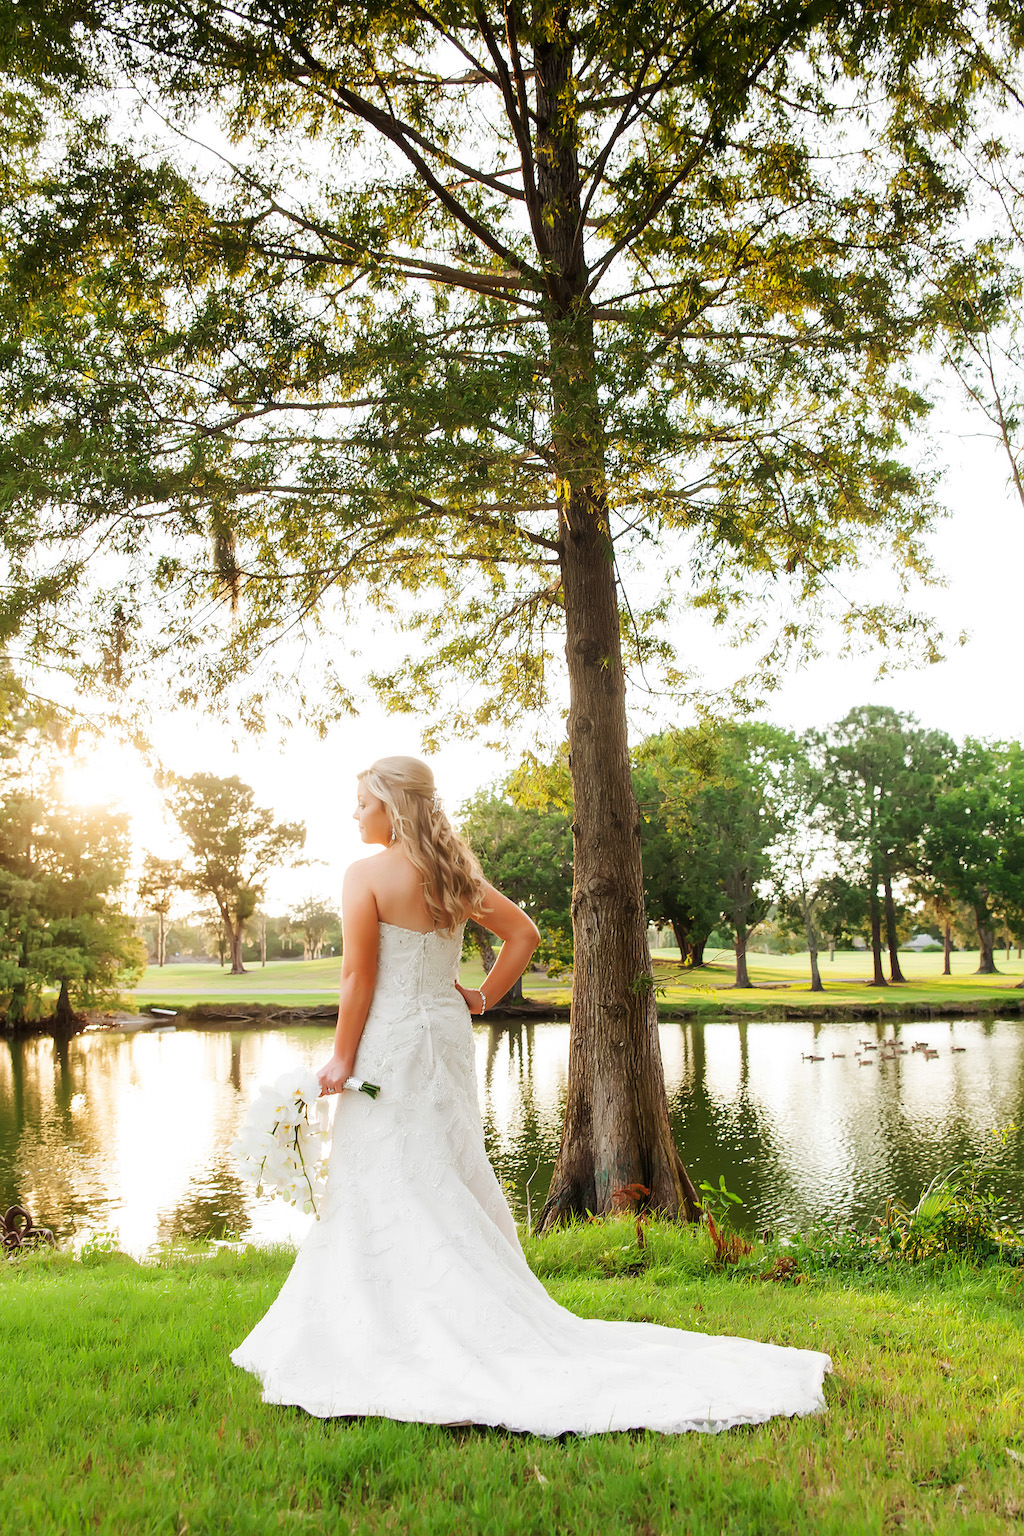 Outdoor Garden Bridal Portrait in Strapless A Line Wedding Dress with White Orchid Bouquet | Clearwater Wedding Photographer Limelight Photography